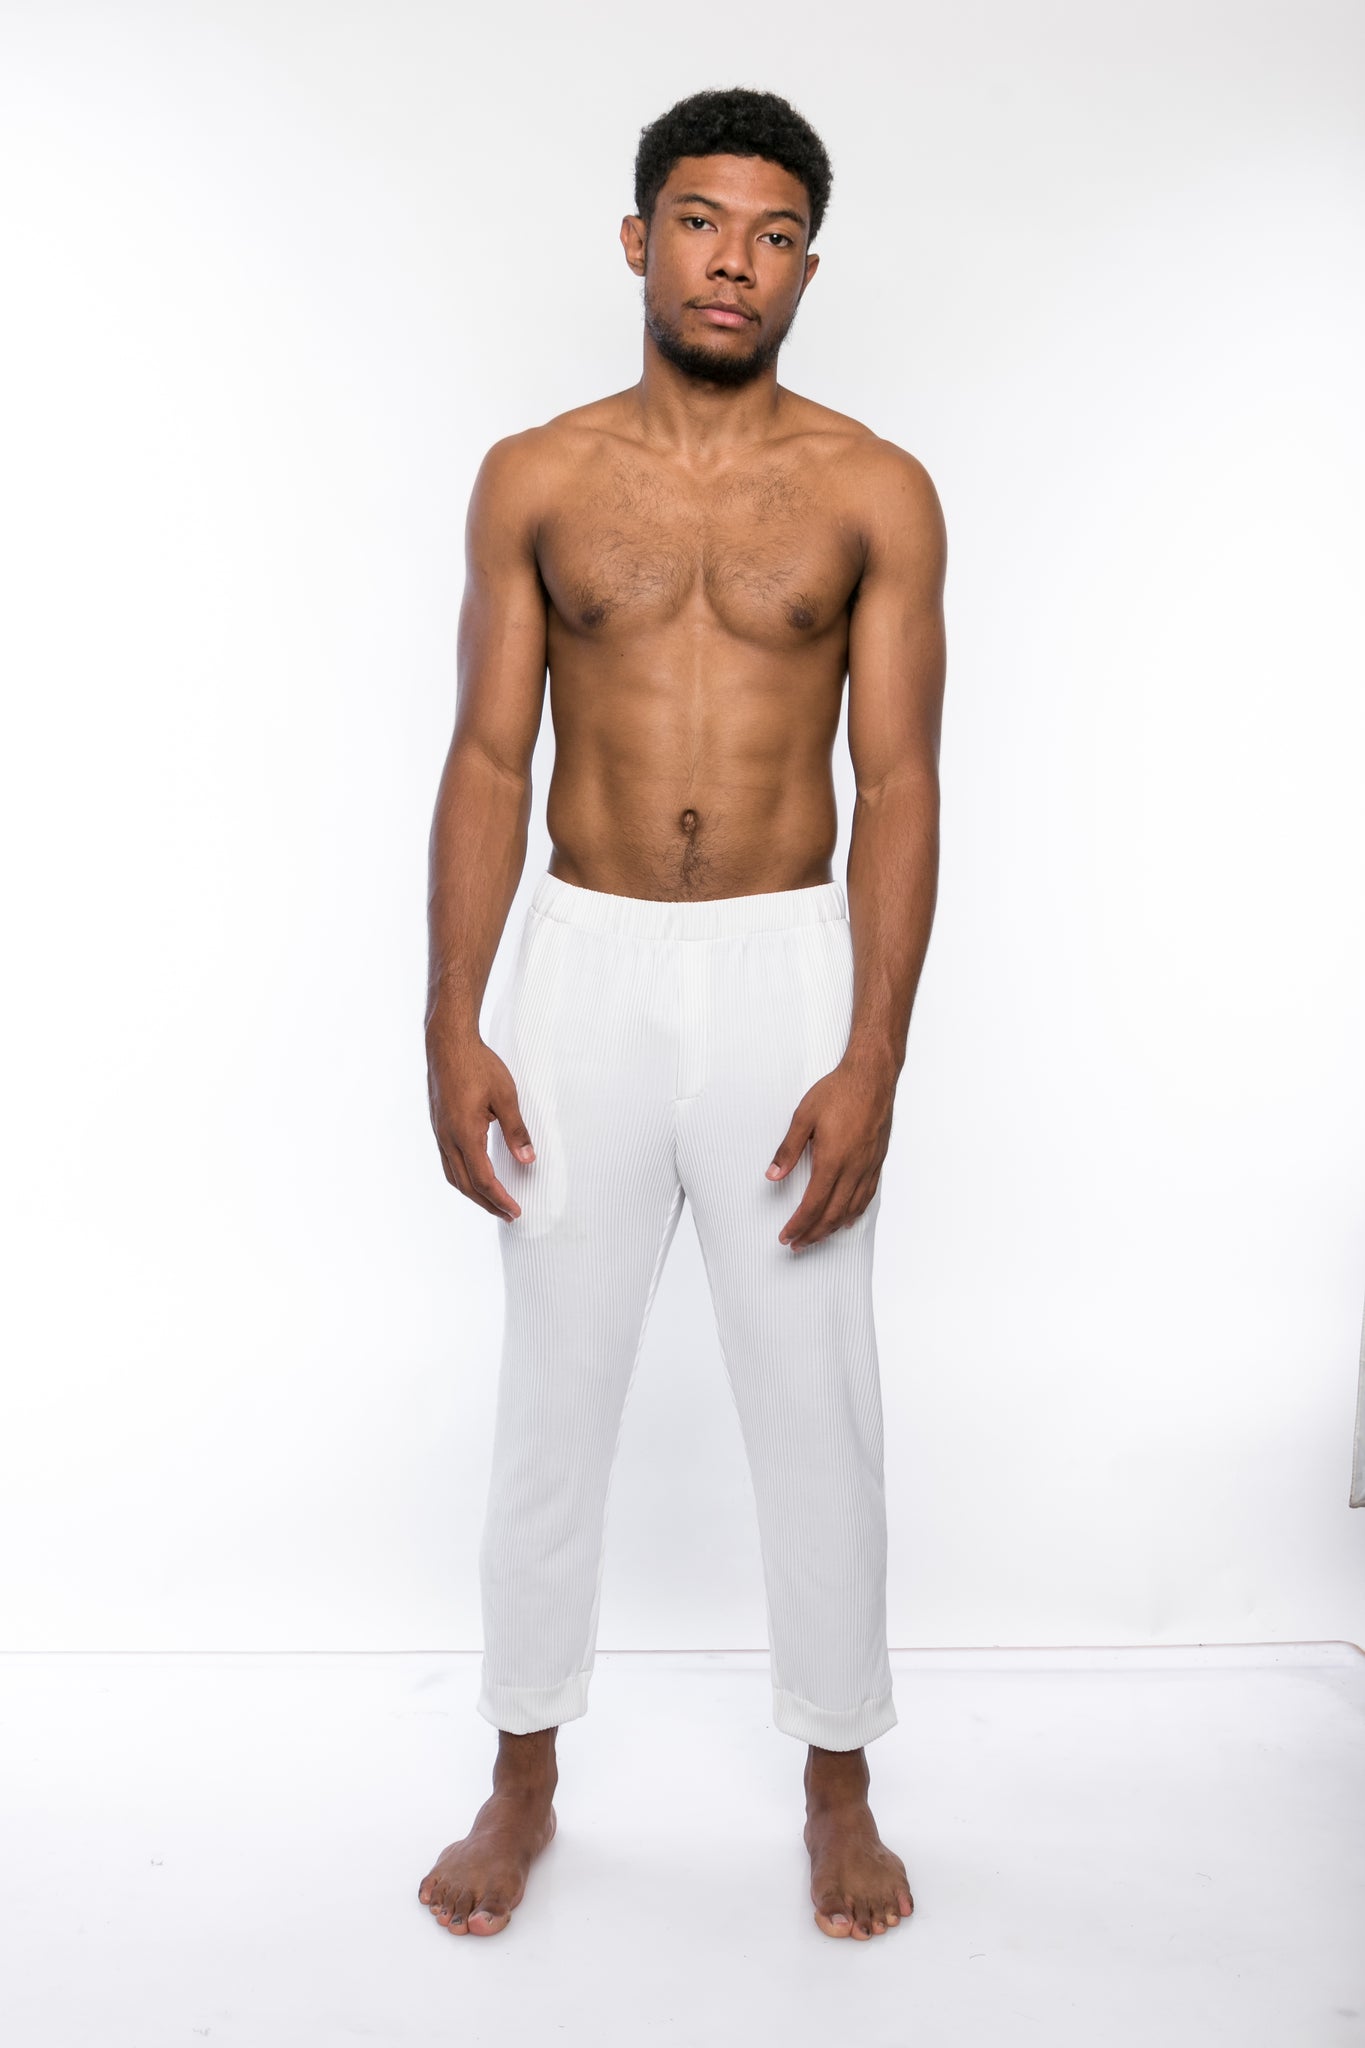 White Pleated Trousers